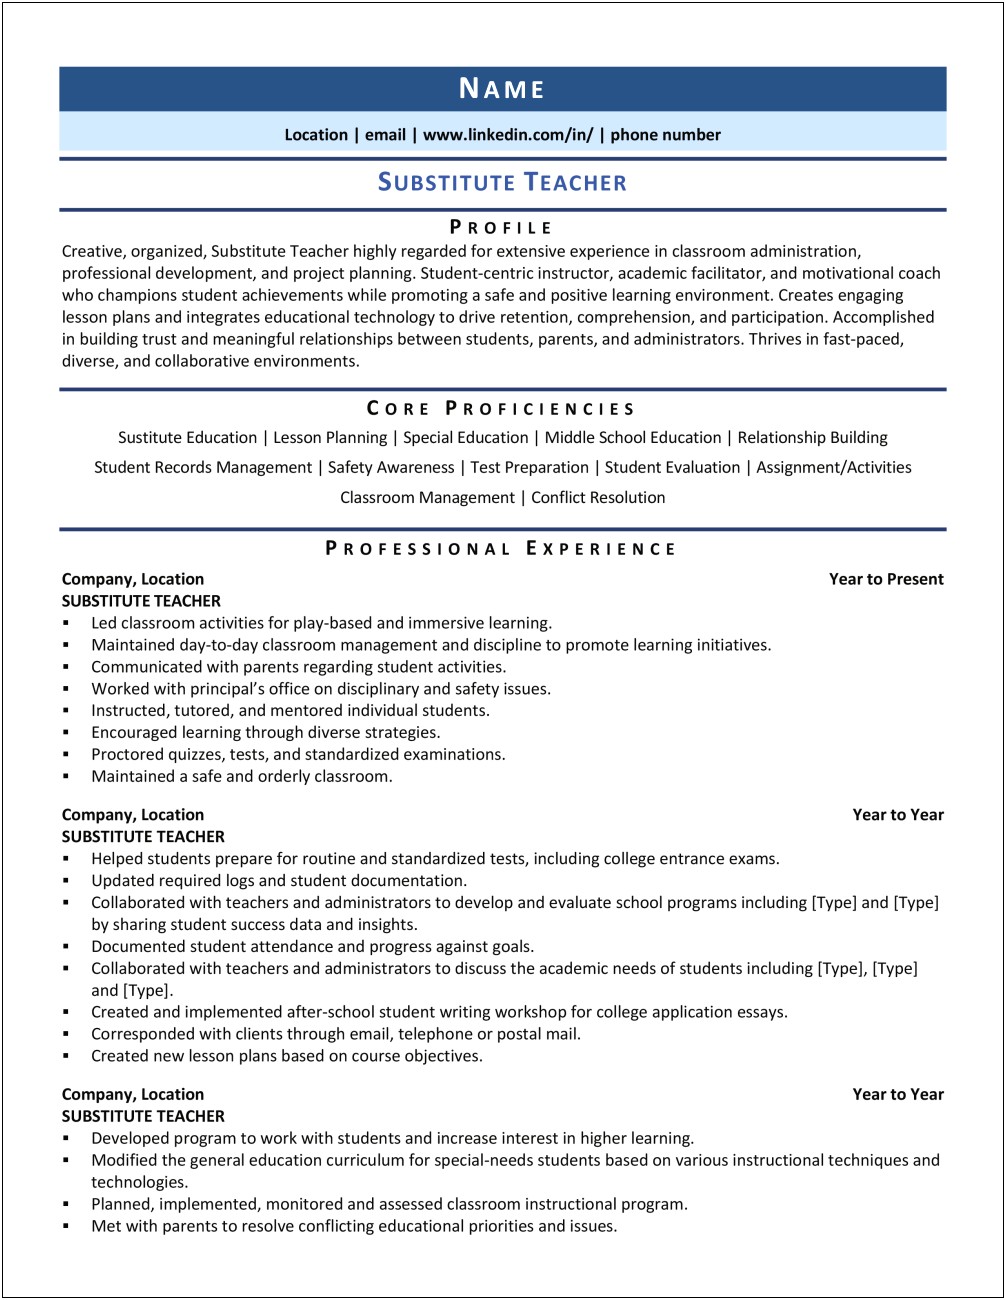 Resume Sample For Student Activities Director